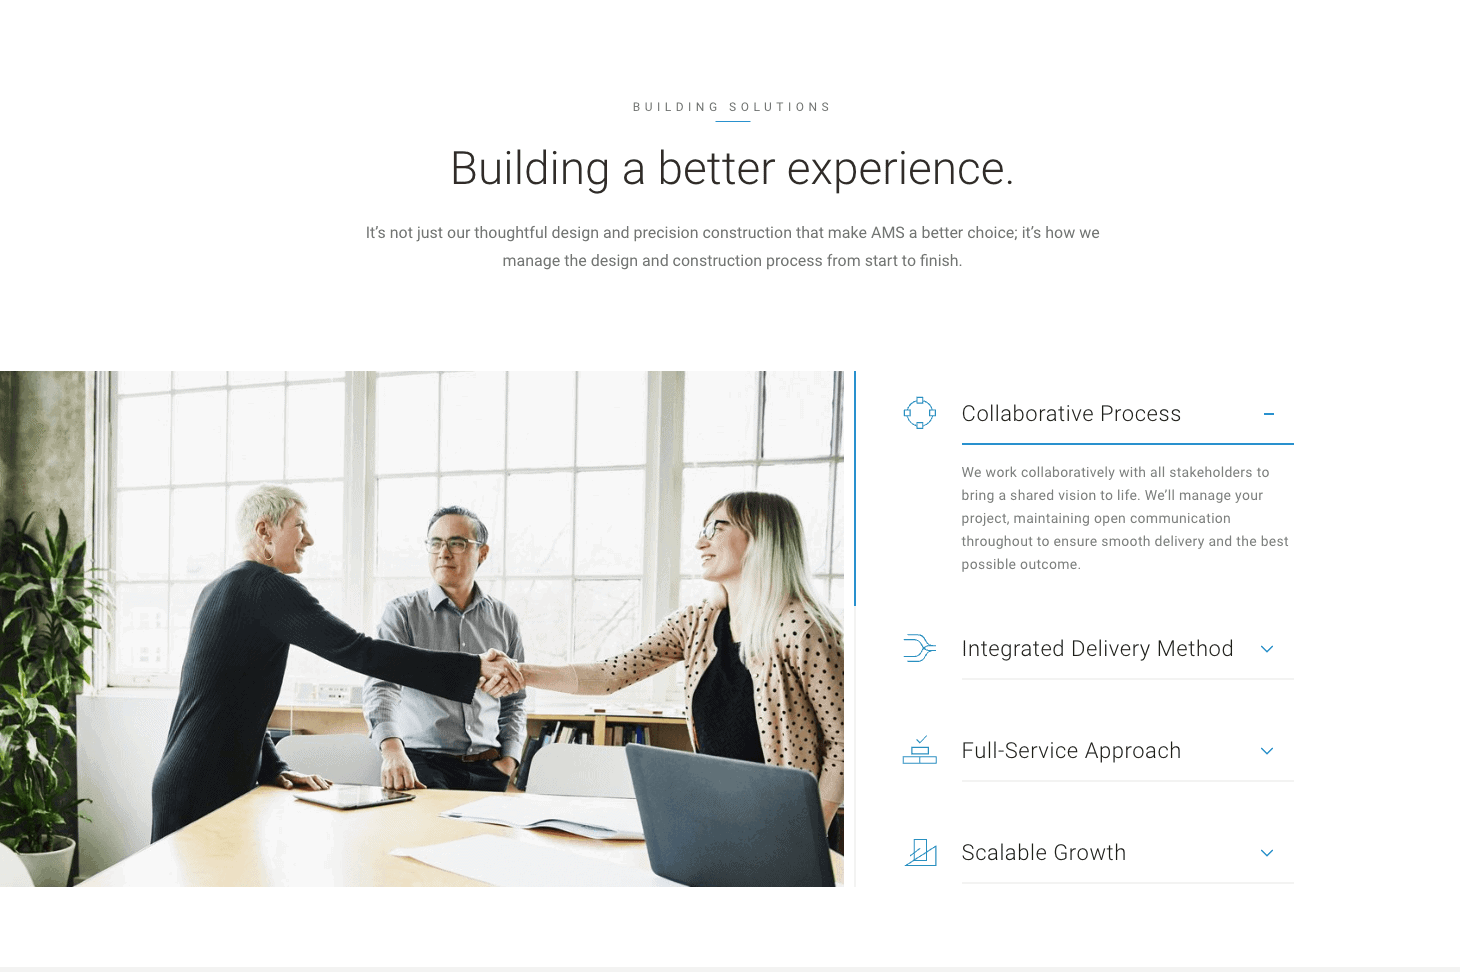 An image of a manufacturing website with the headline “Building a better experience,” and four content areas labeled “Collaborative Process,” “Integrated Delivery System,” “Full-Service Approach,” and “Scalable Growth.”